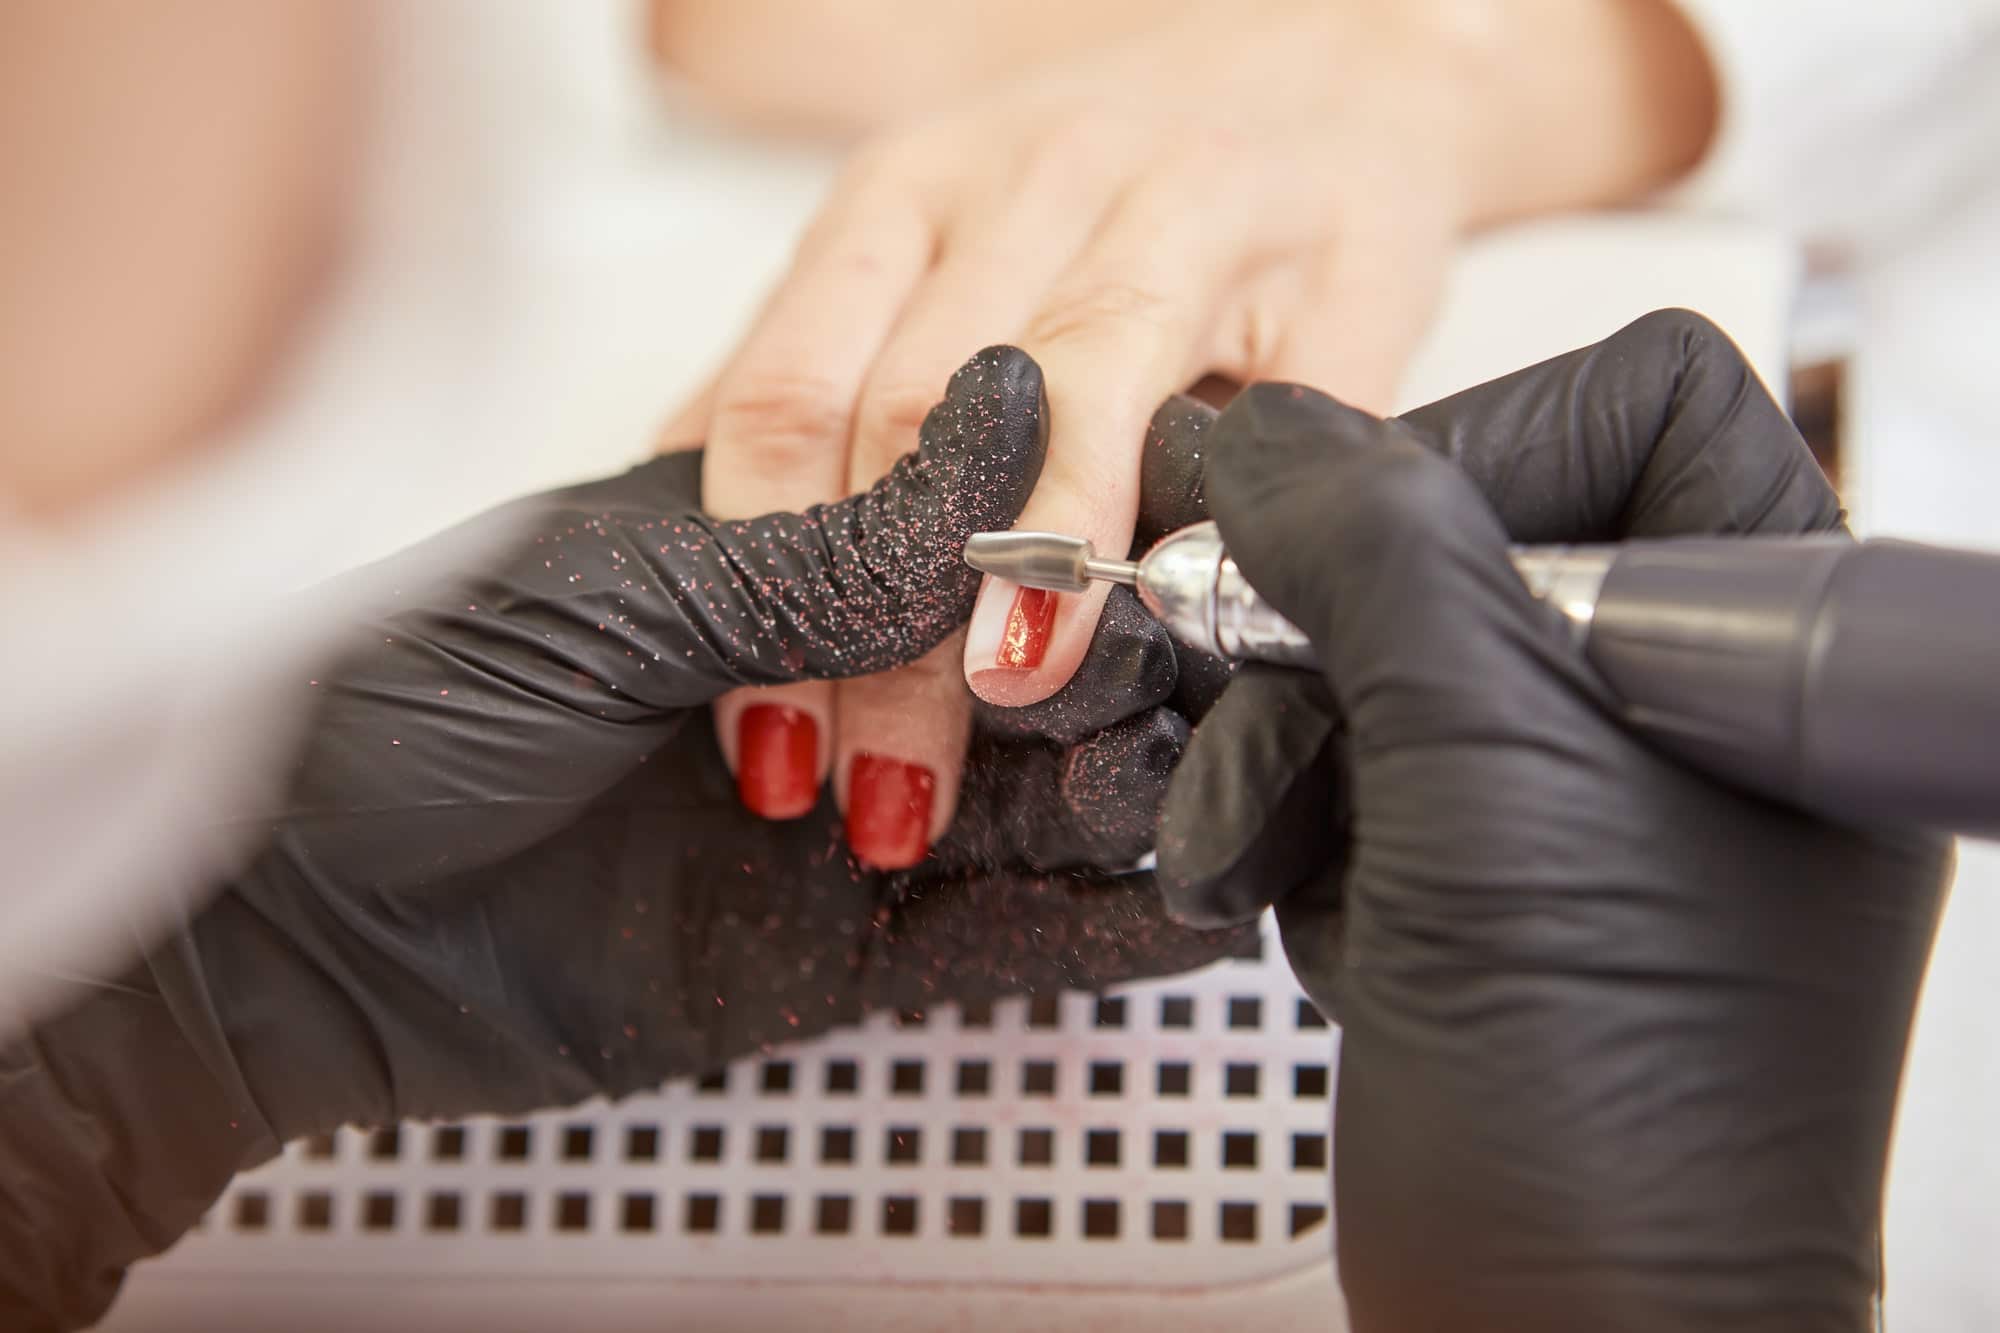 Manicurist hands in gloves removing shellac from client nails